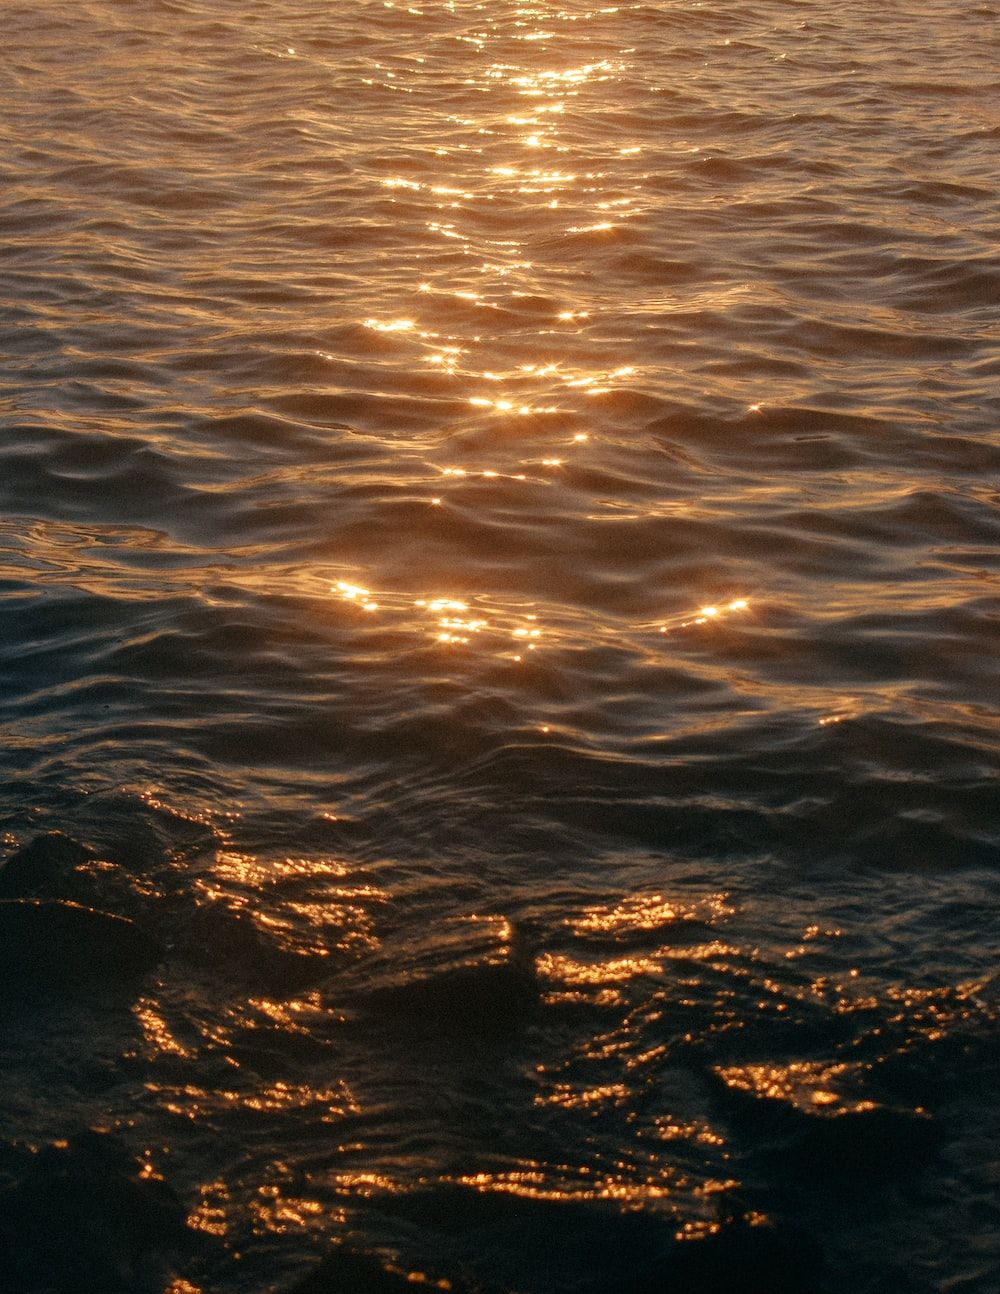 Sunlight reflecting on the water - Wave, light brown, sunset, water